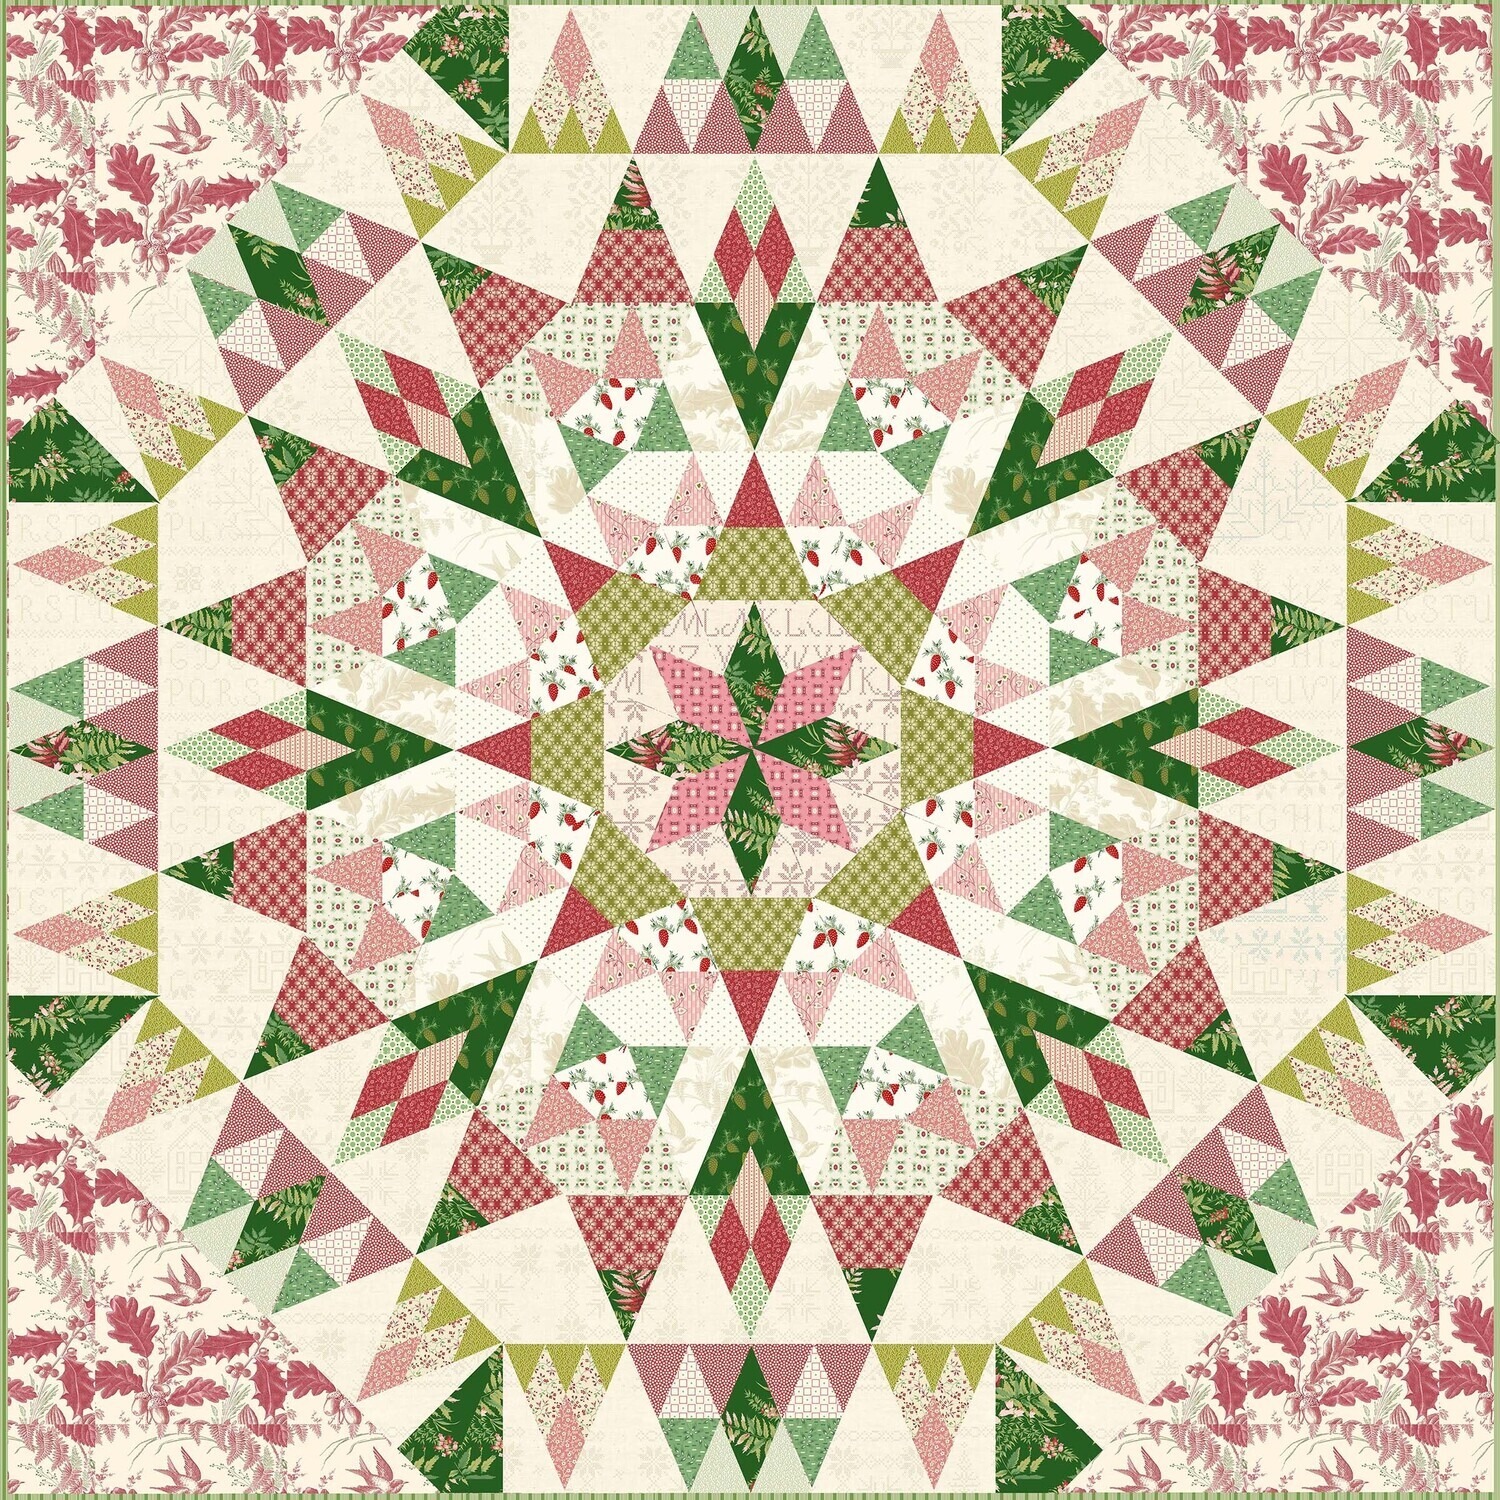 Montana Quilt shown in Noel Fabrics: Kits and Pattern Available